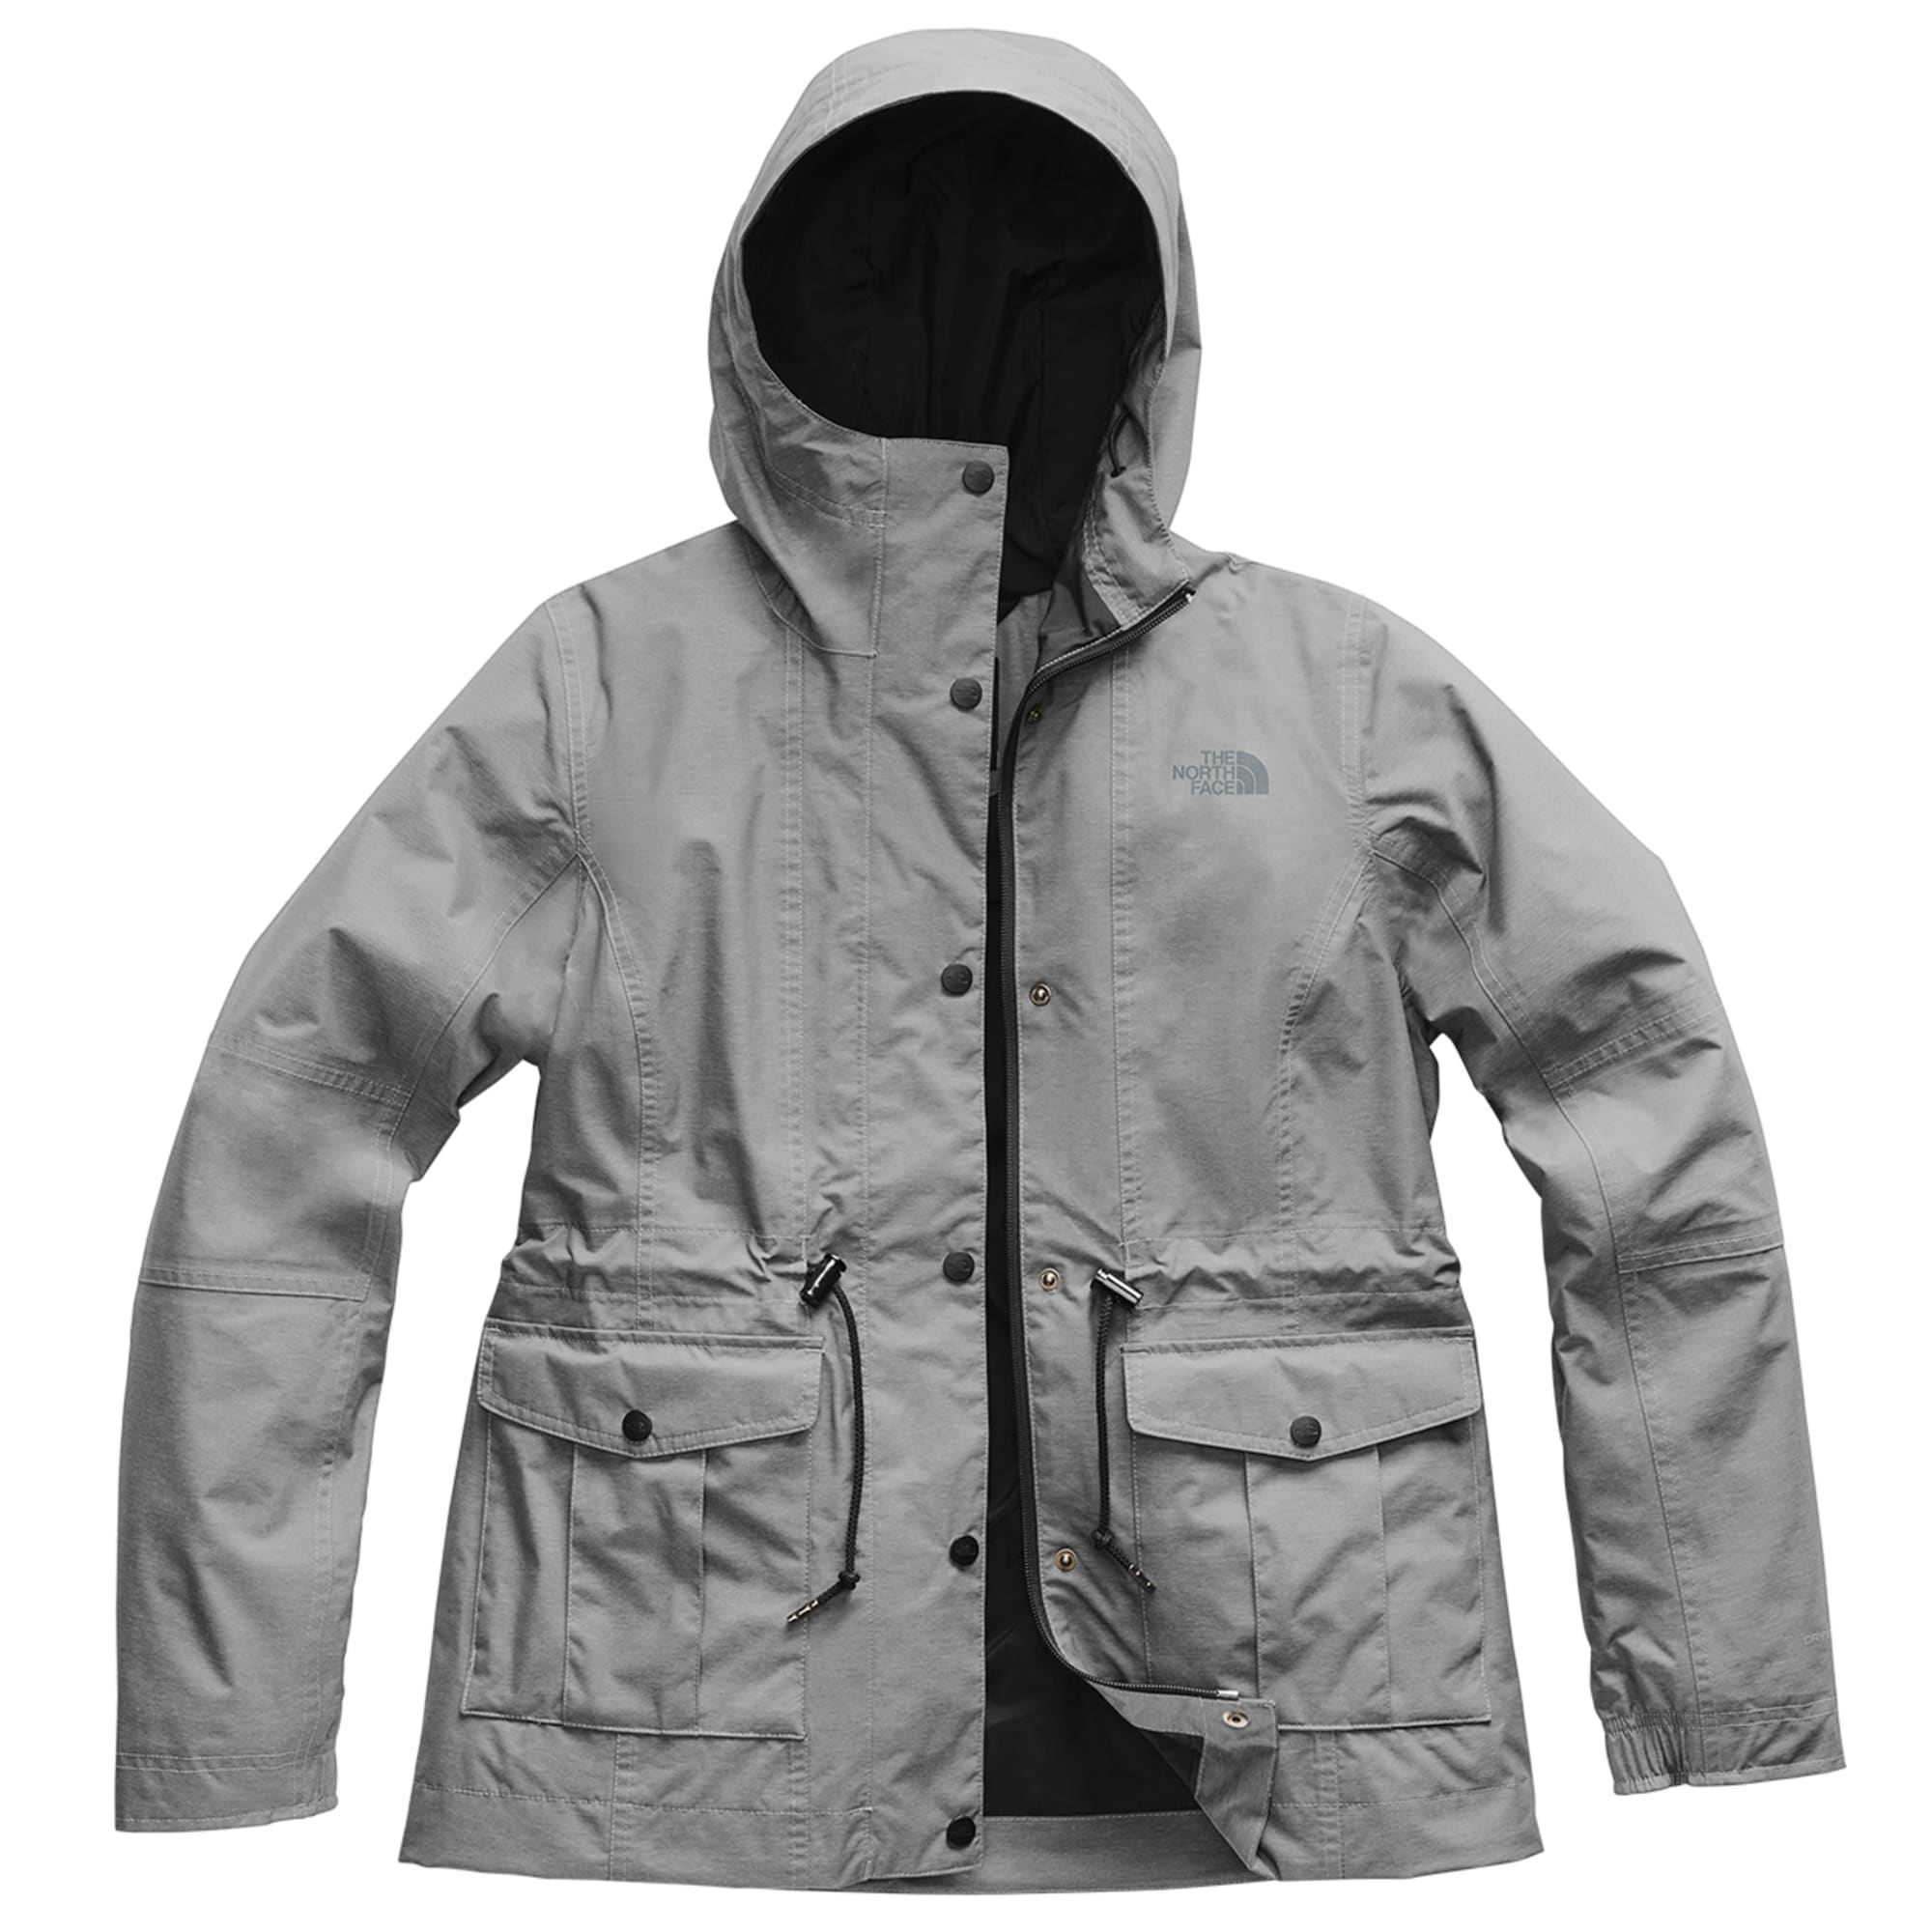 THE NORTH FACE Women's Zoomie Jacket - Eastern Mountain Sports